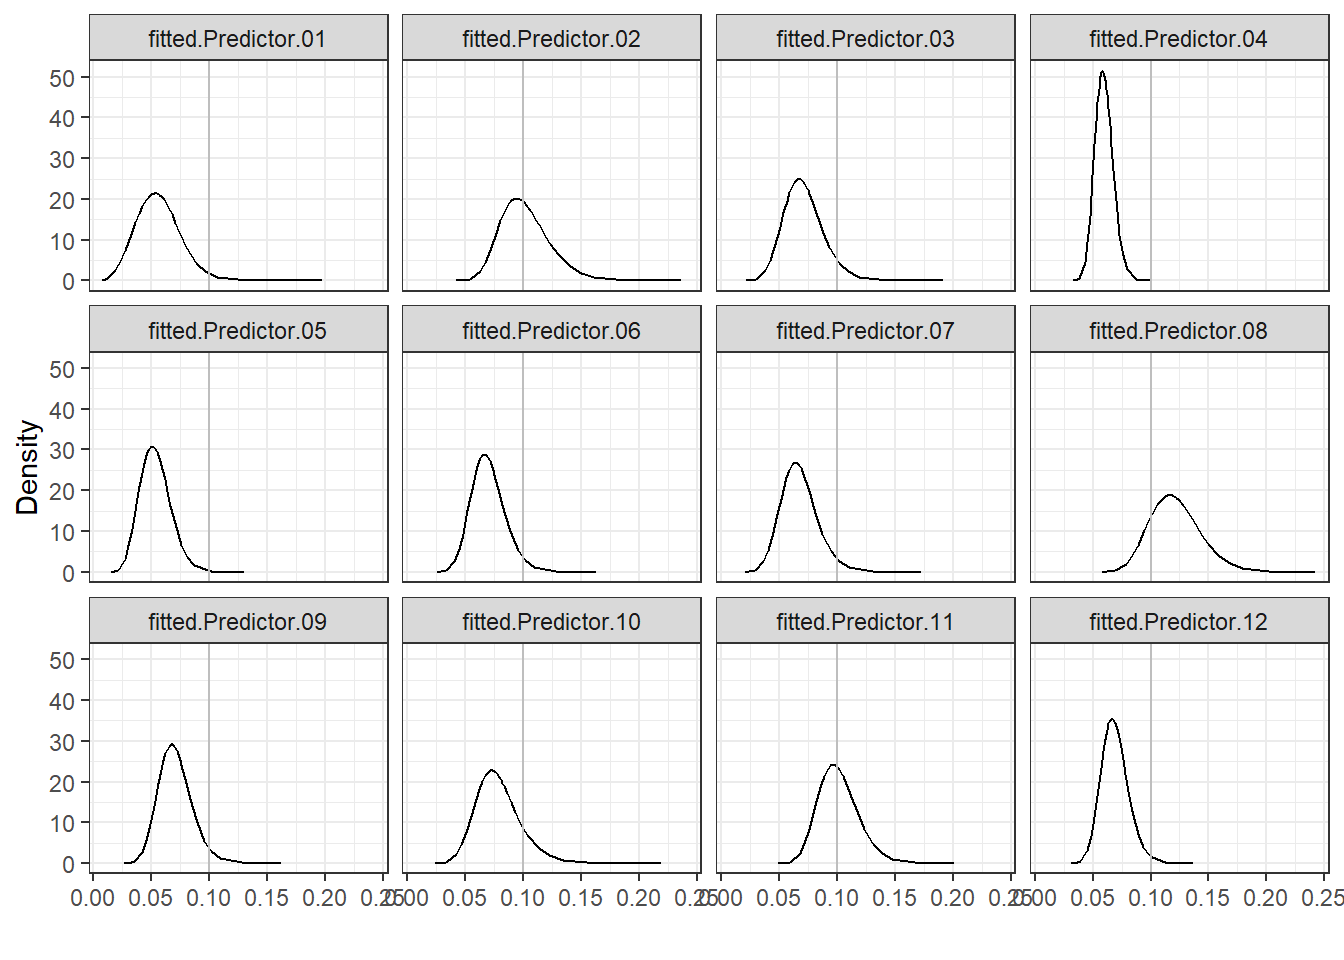 Posterior distributions of mortality rates of each hospital.